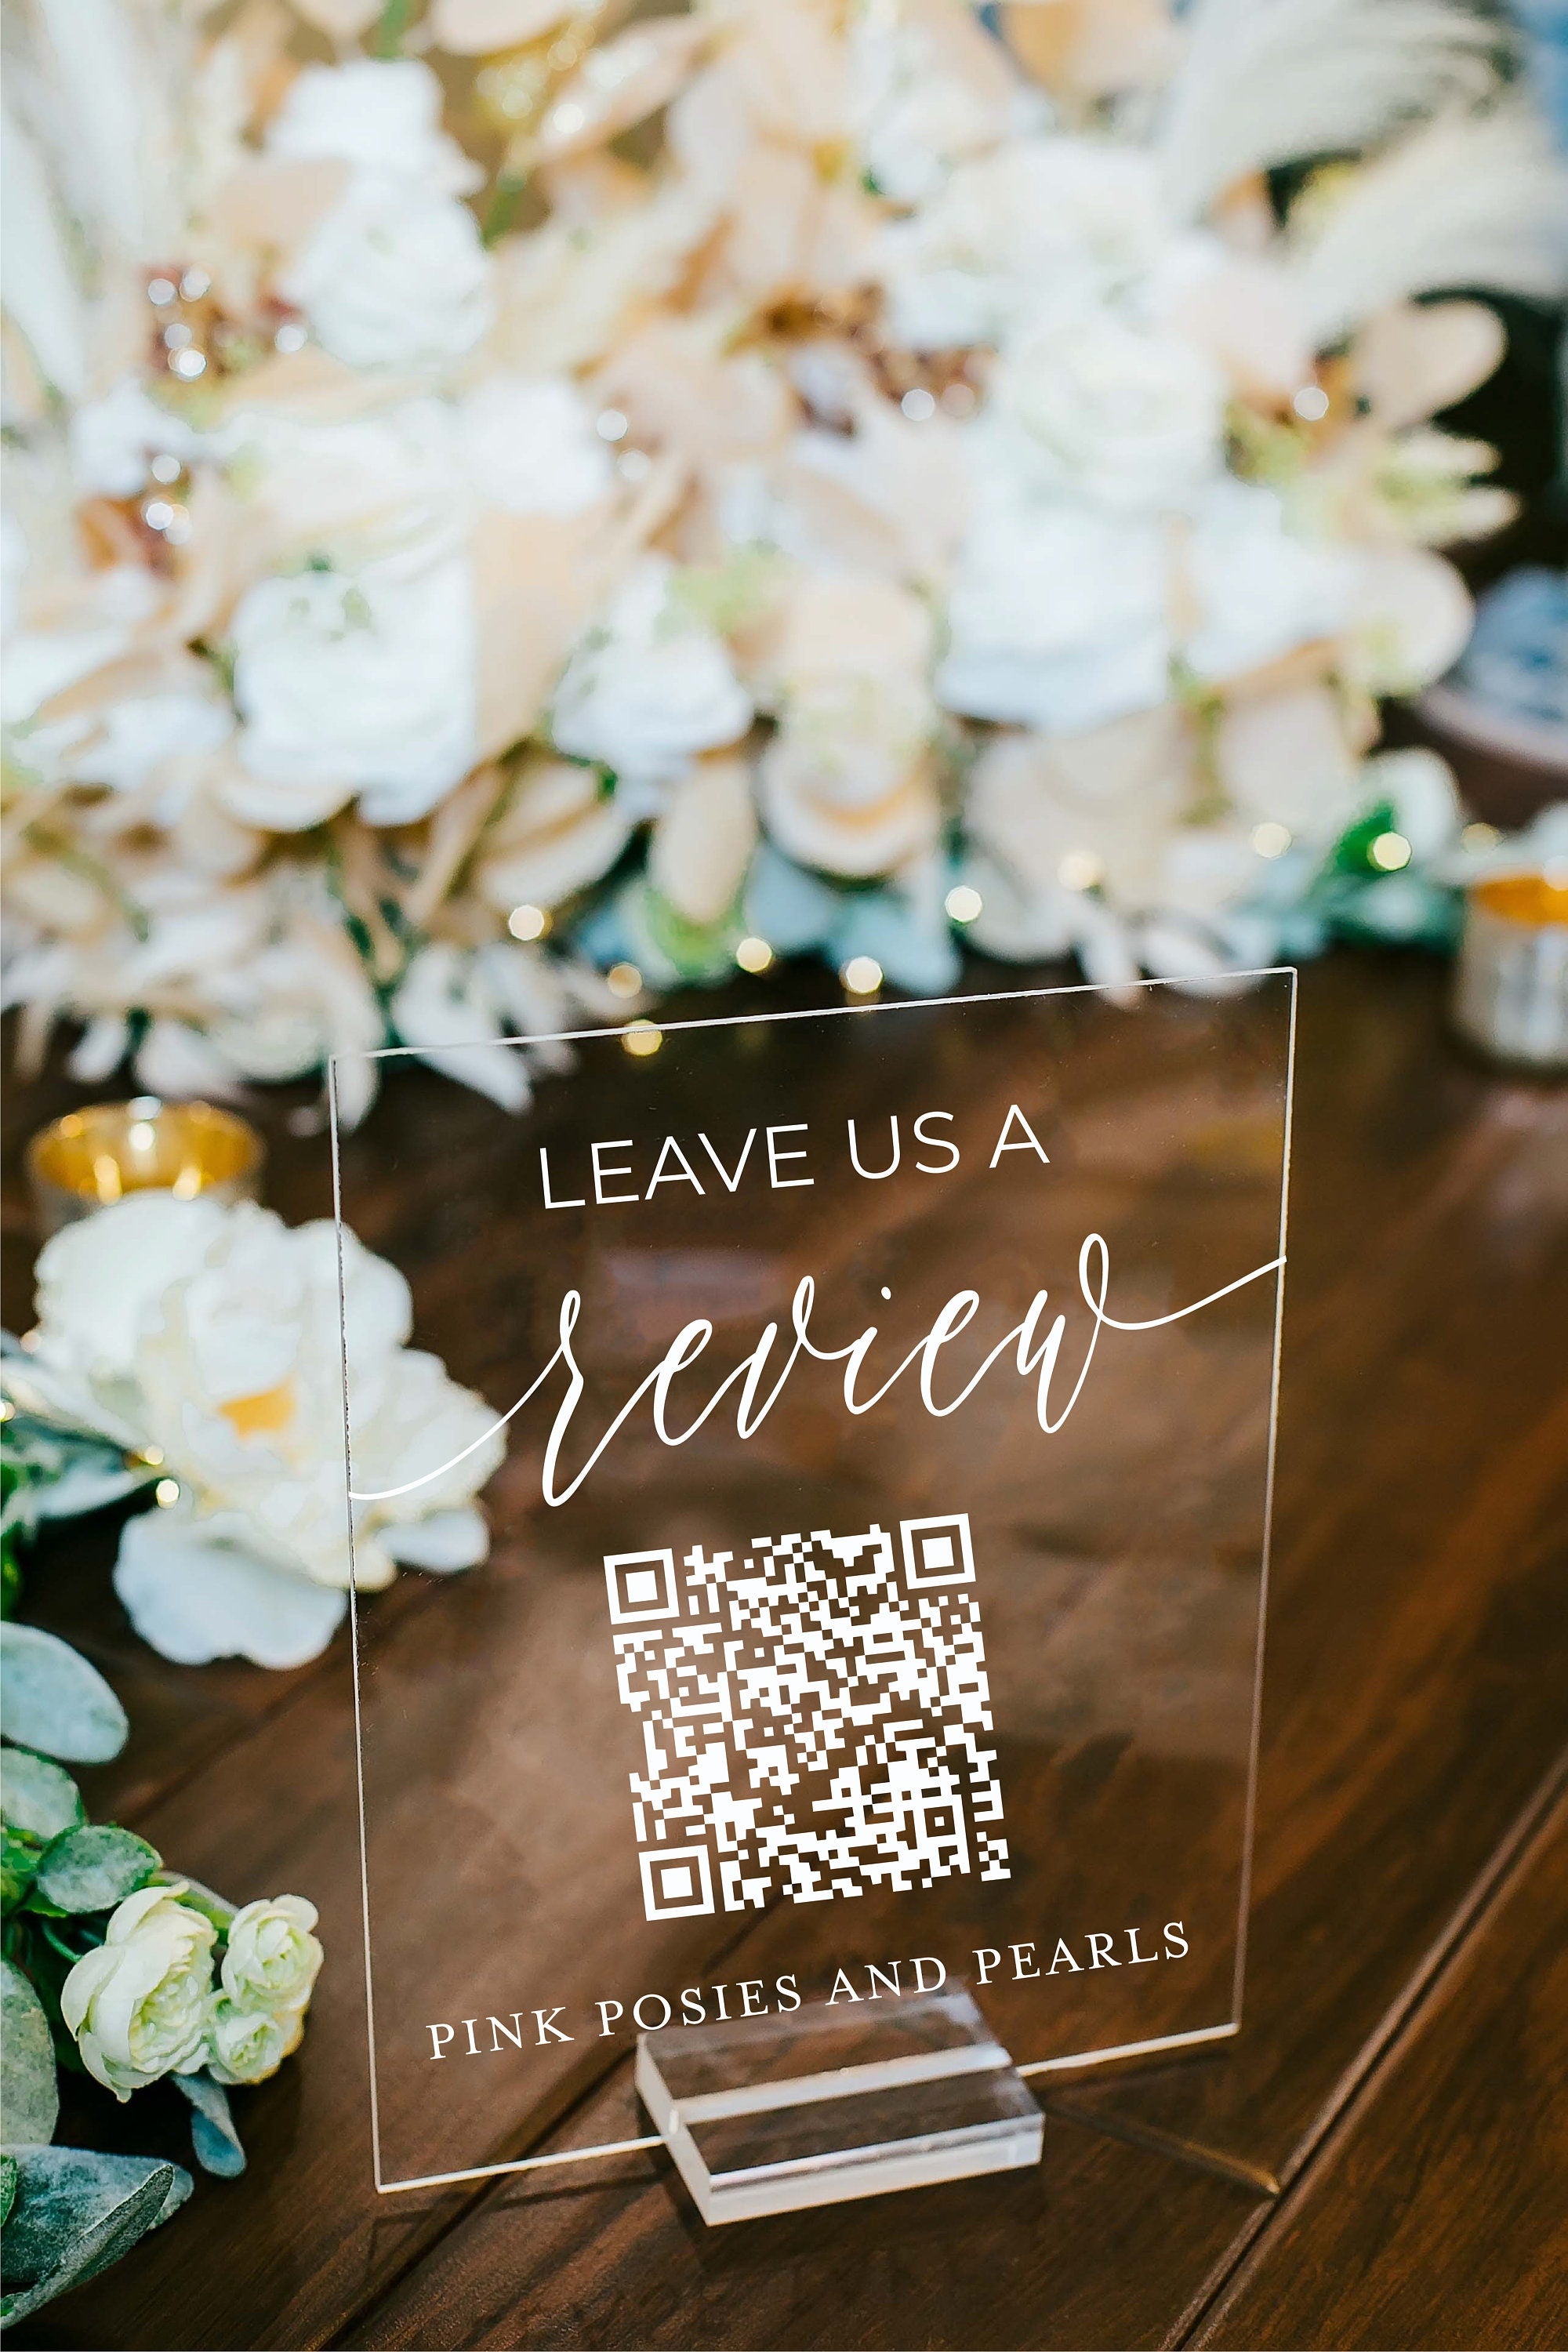 Leave Us A Review Retail Scannable QR Code Clear Glass Look Acrylic Sign, Instagram Hashtag Plexiglass Perspex Lucite Table Sign